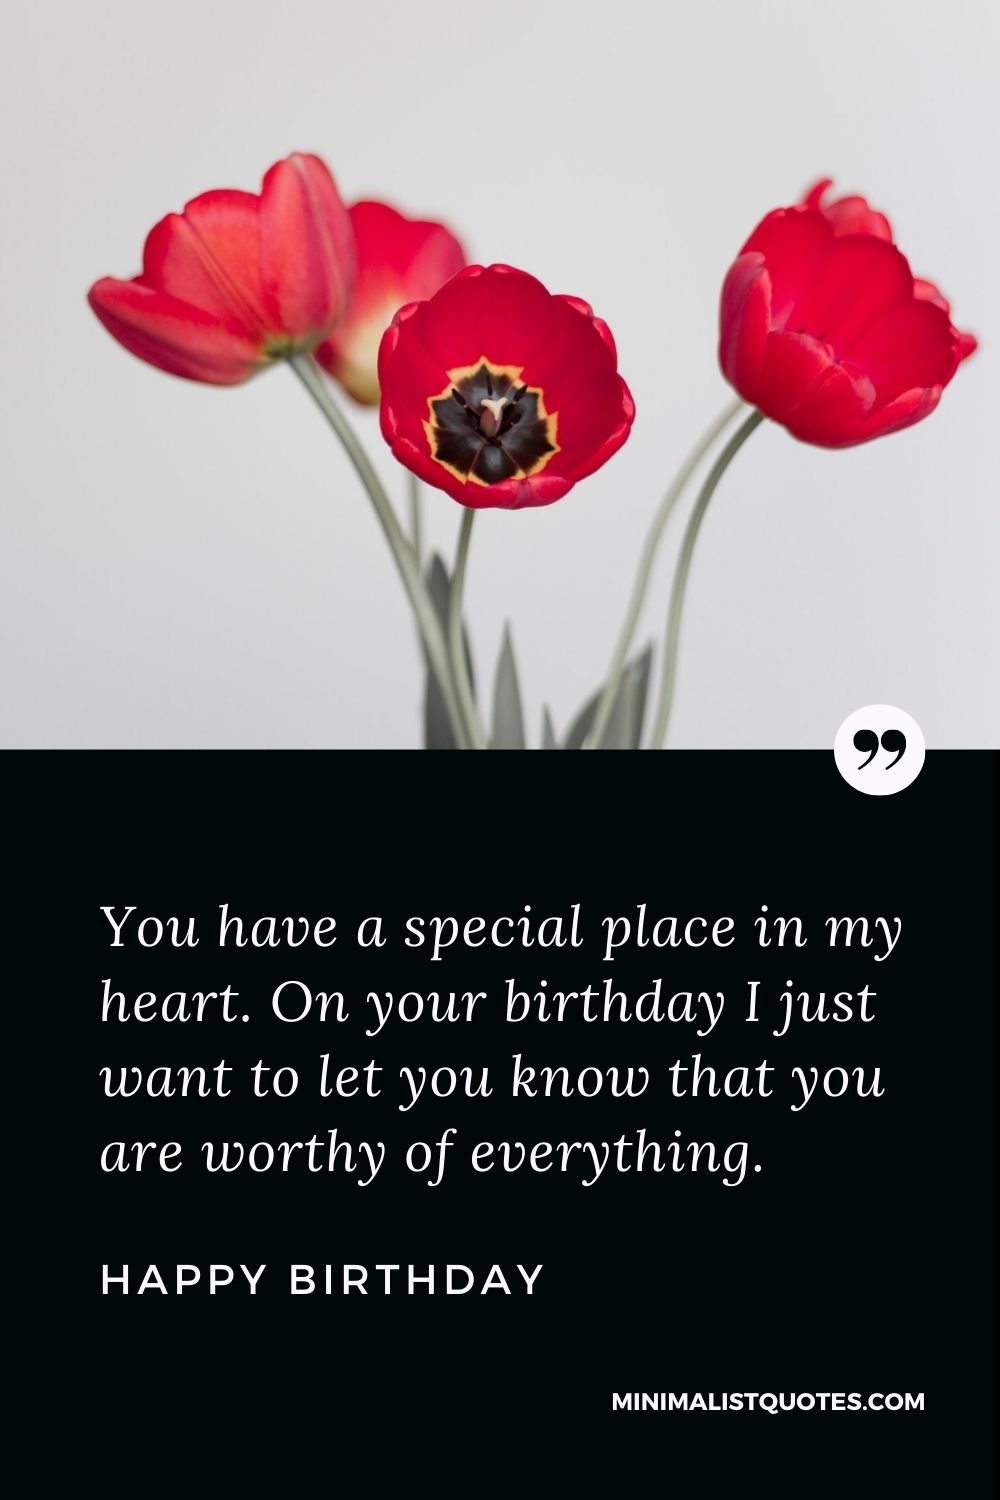 Happy Birthday Wishes - You have a special place in my heart. On your birthday I just want to let you know that you are worthy of everything.